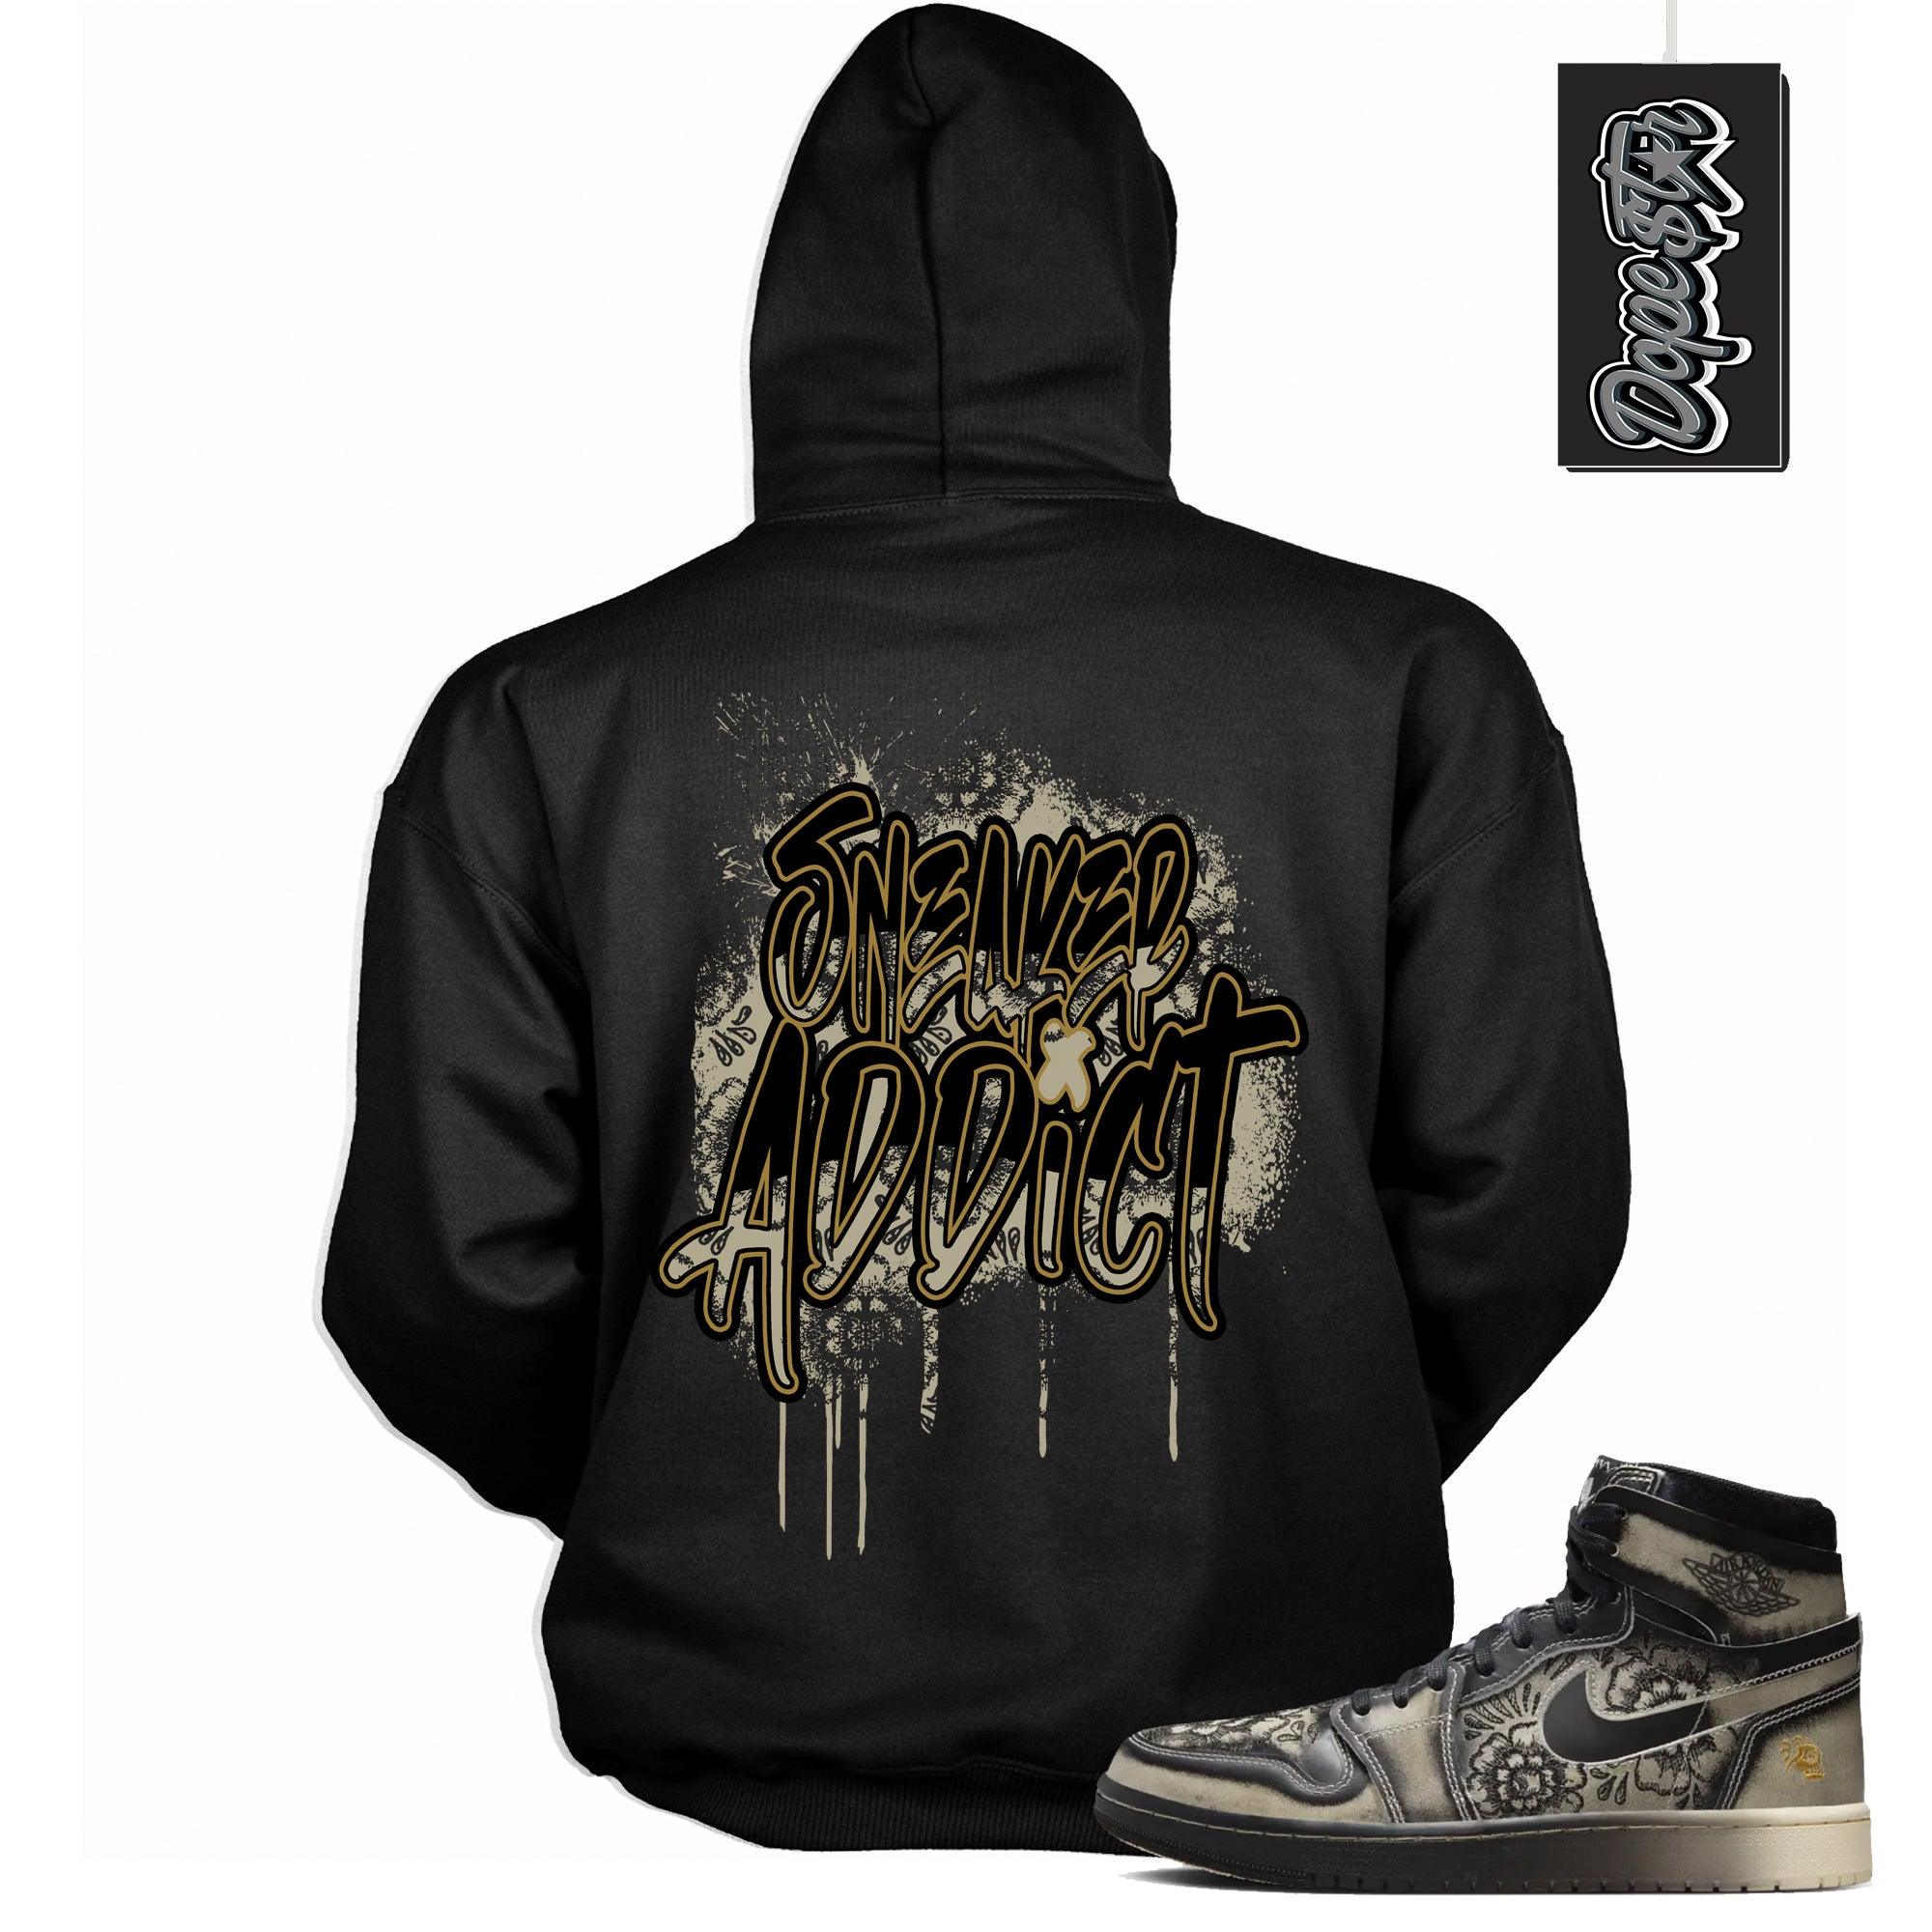 Cool Black Graphic Hoodie with “ Sneaker Addict “ print, that perfectly matches Air Jordan 1 High Zoom Comfort 2 Dia de Muertos Black and Pale Ivory sneakers